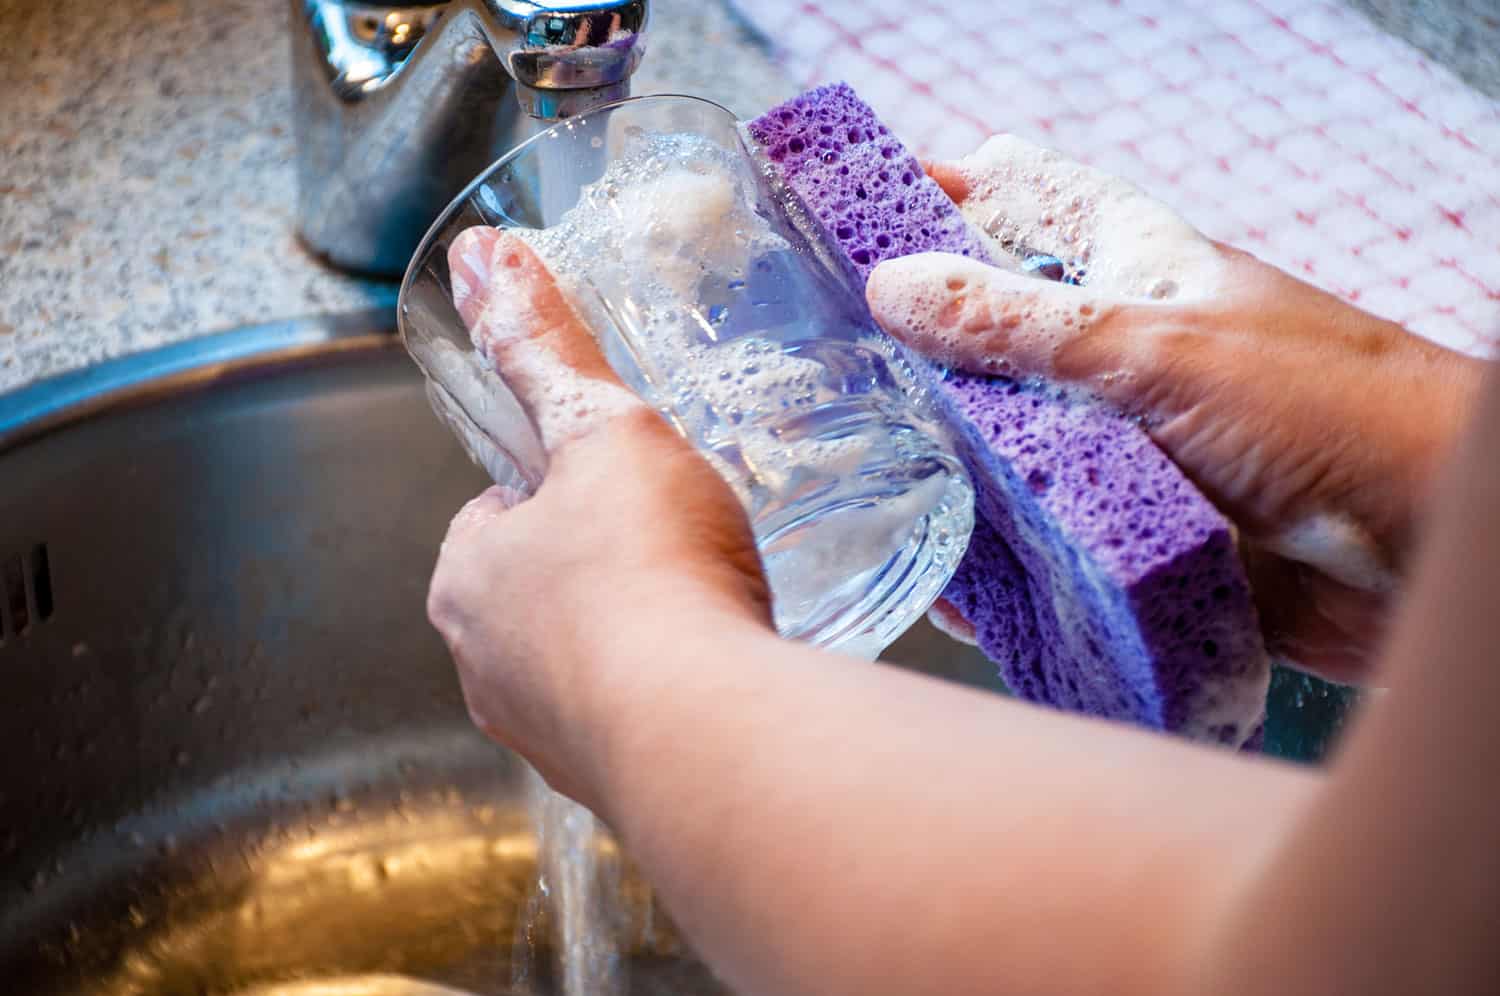 Woman hand-washing a drinking glass with soapy sponge in kitchen sink.